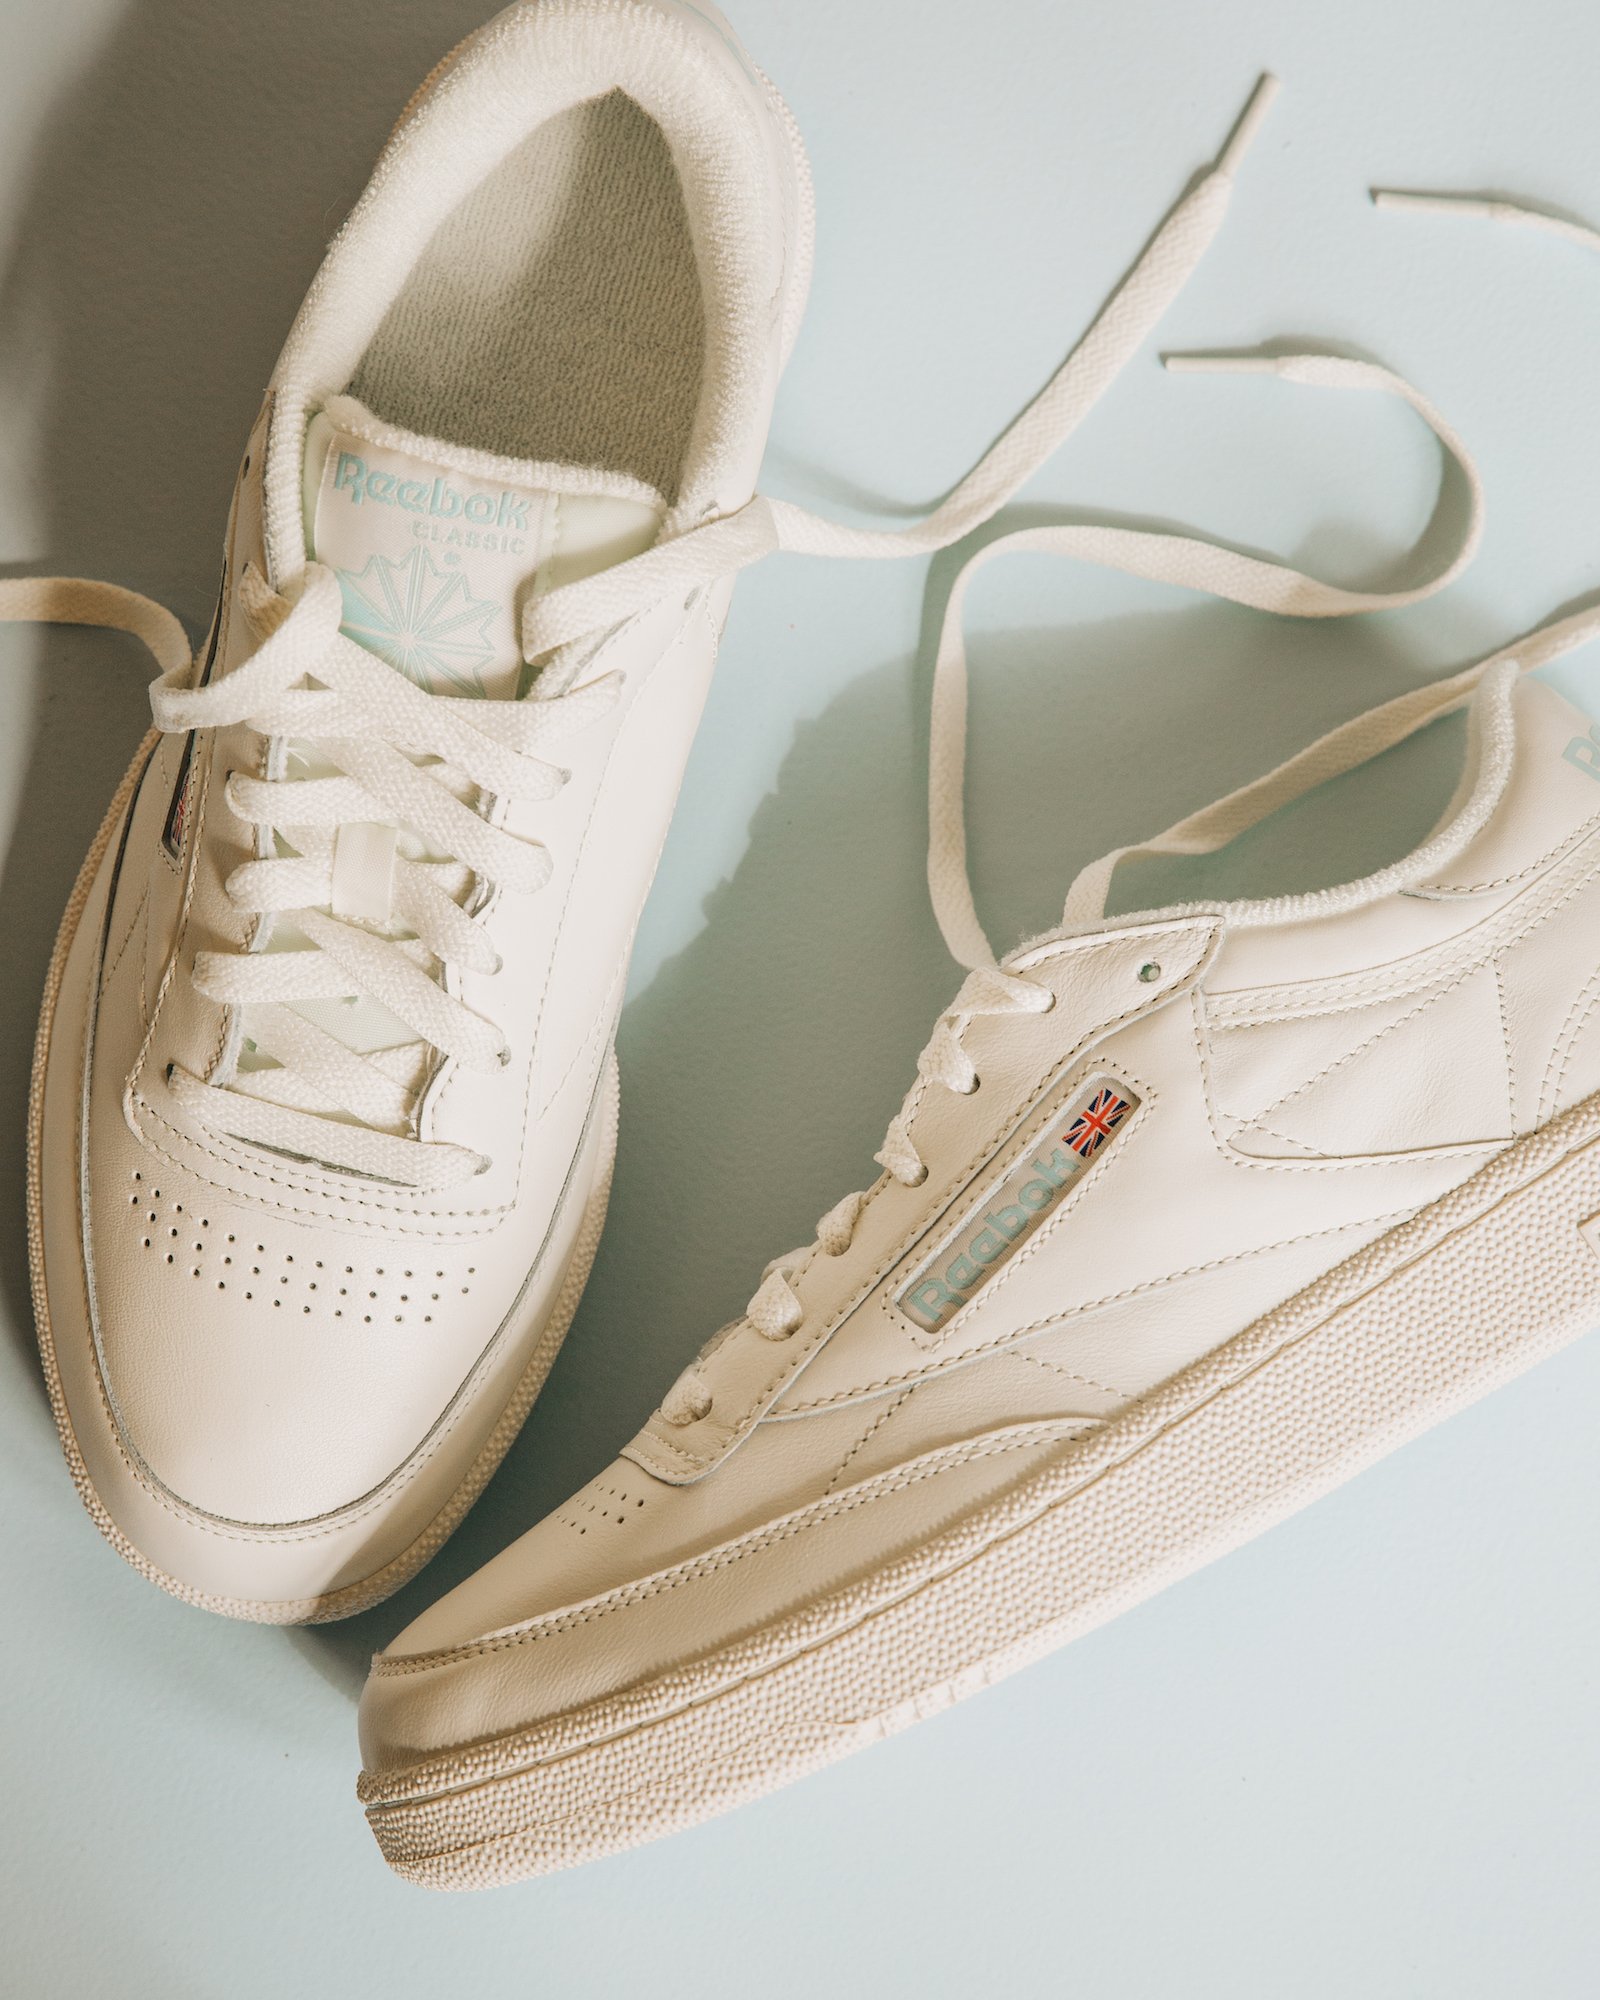 Urban Outfitters on "Oh, it's a must. Shop the Reebok UO Exclusive Club C 85 available now, only at UO. #UOonYou https://t.co/jq1wm9N85S https://t.co/eMkgXuk6Ko" / X